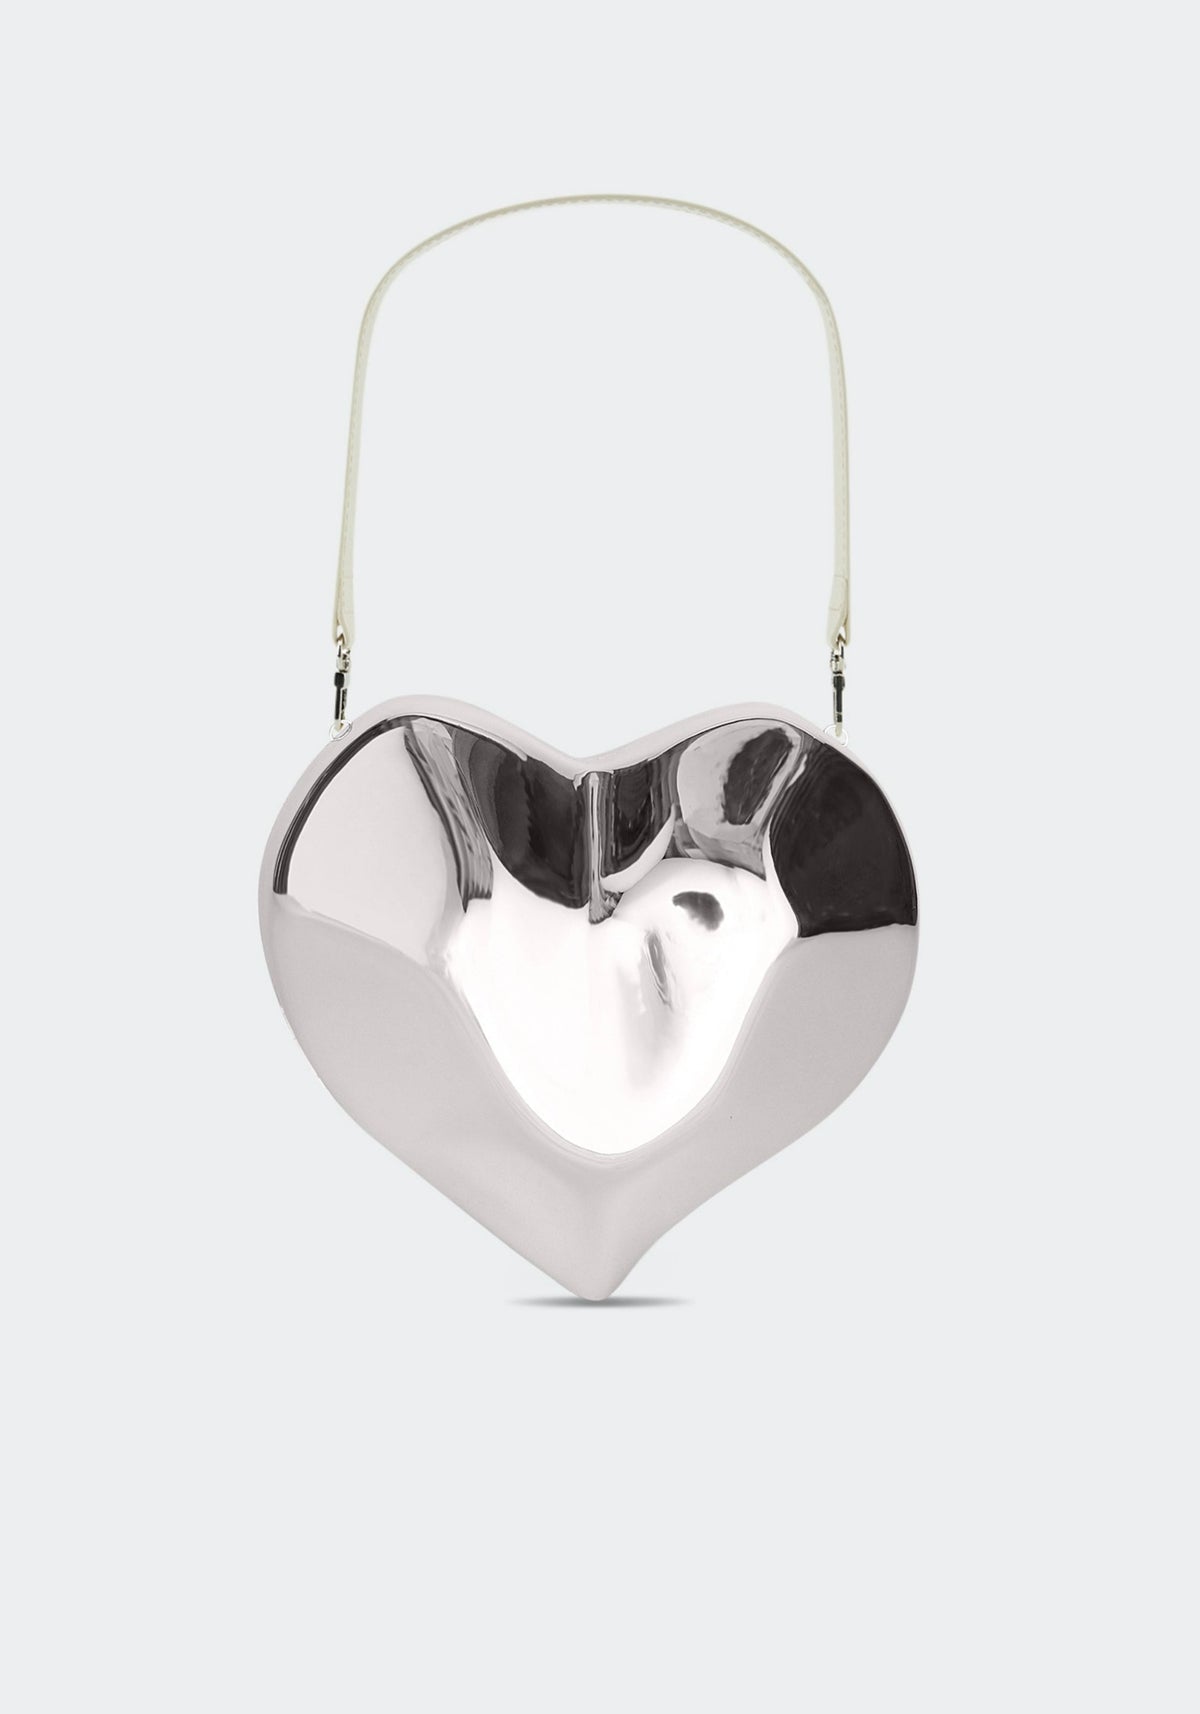 S1005-MOLDED-HEART-BAG-SILVER